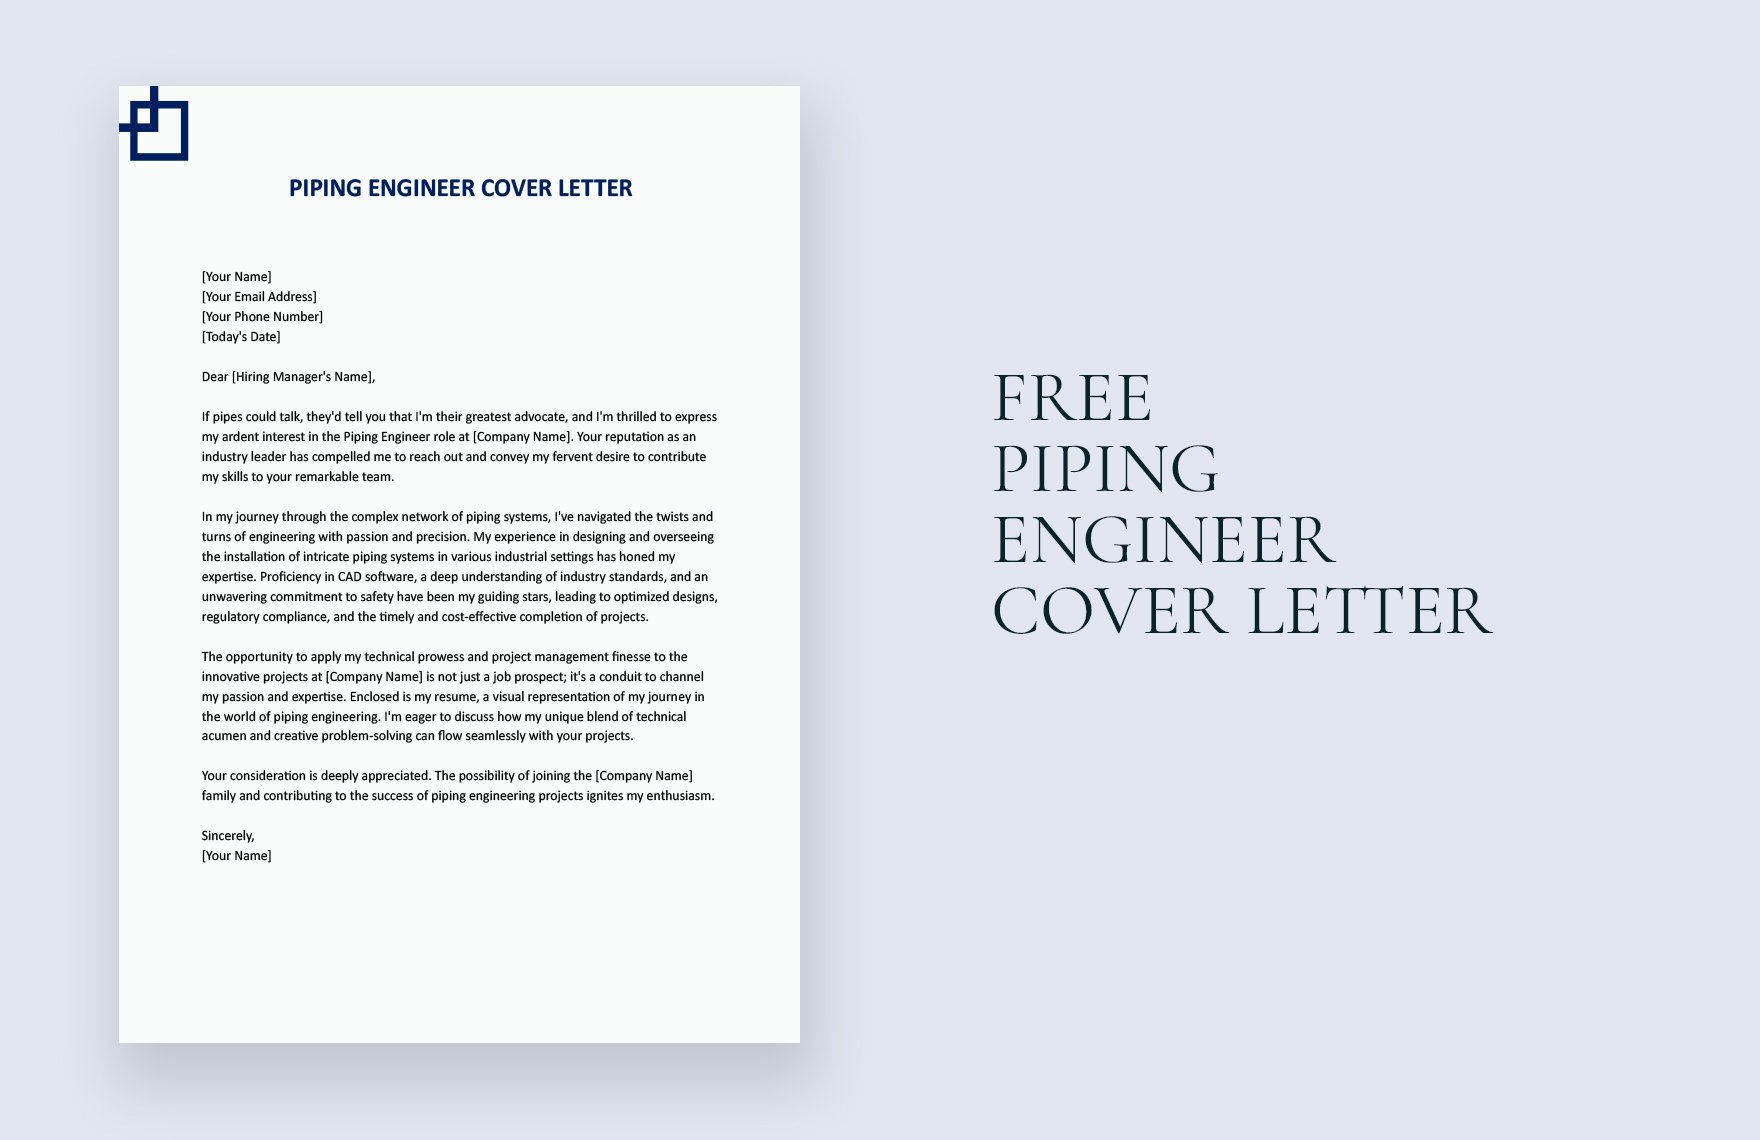 Piping Engineer Cover Letter in Word, Google Docs